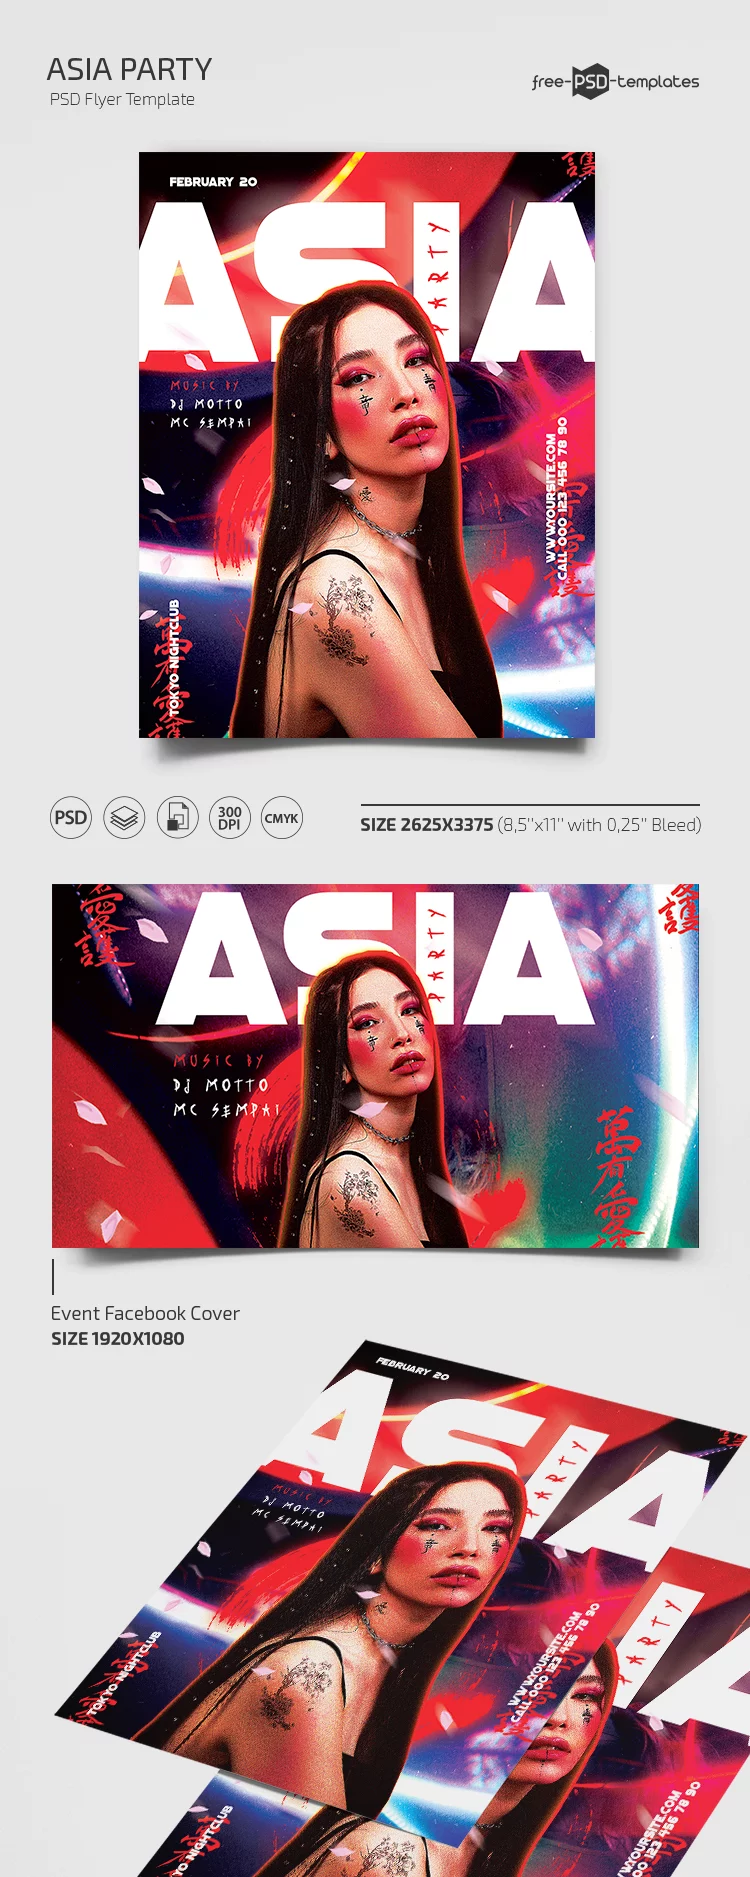 Free Asia Party Flyer Template in PSD